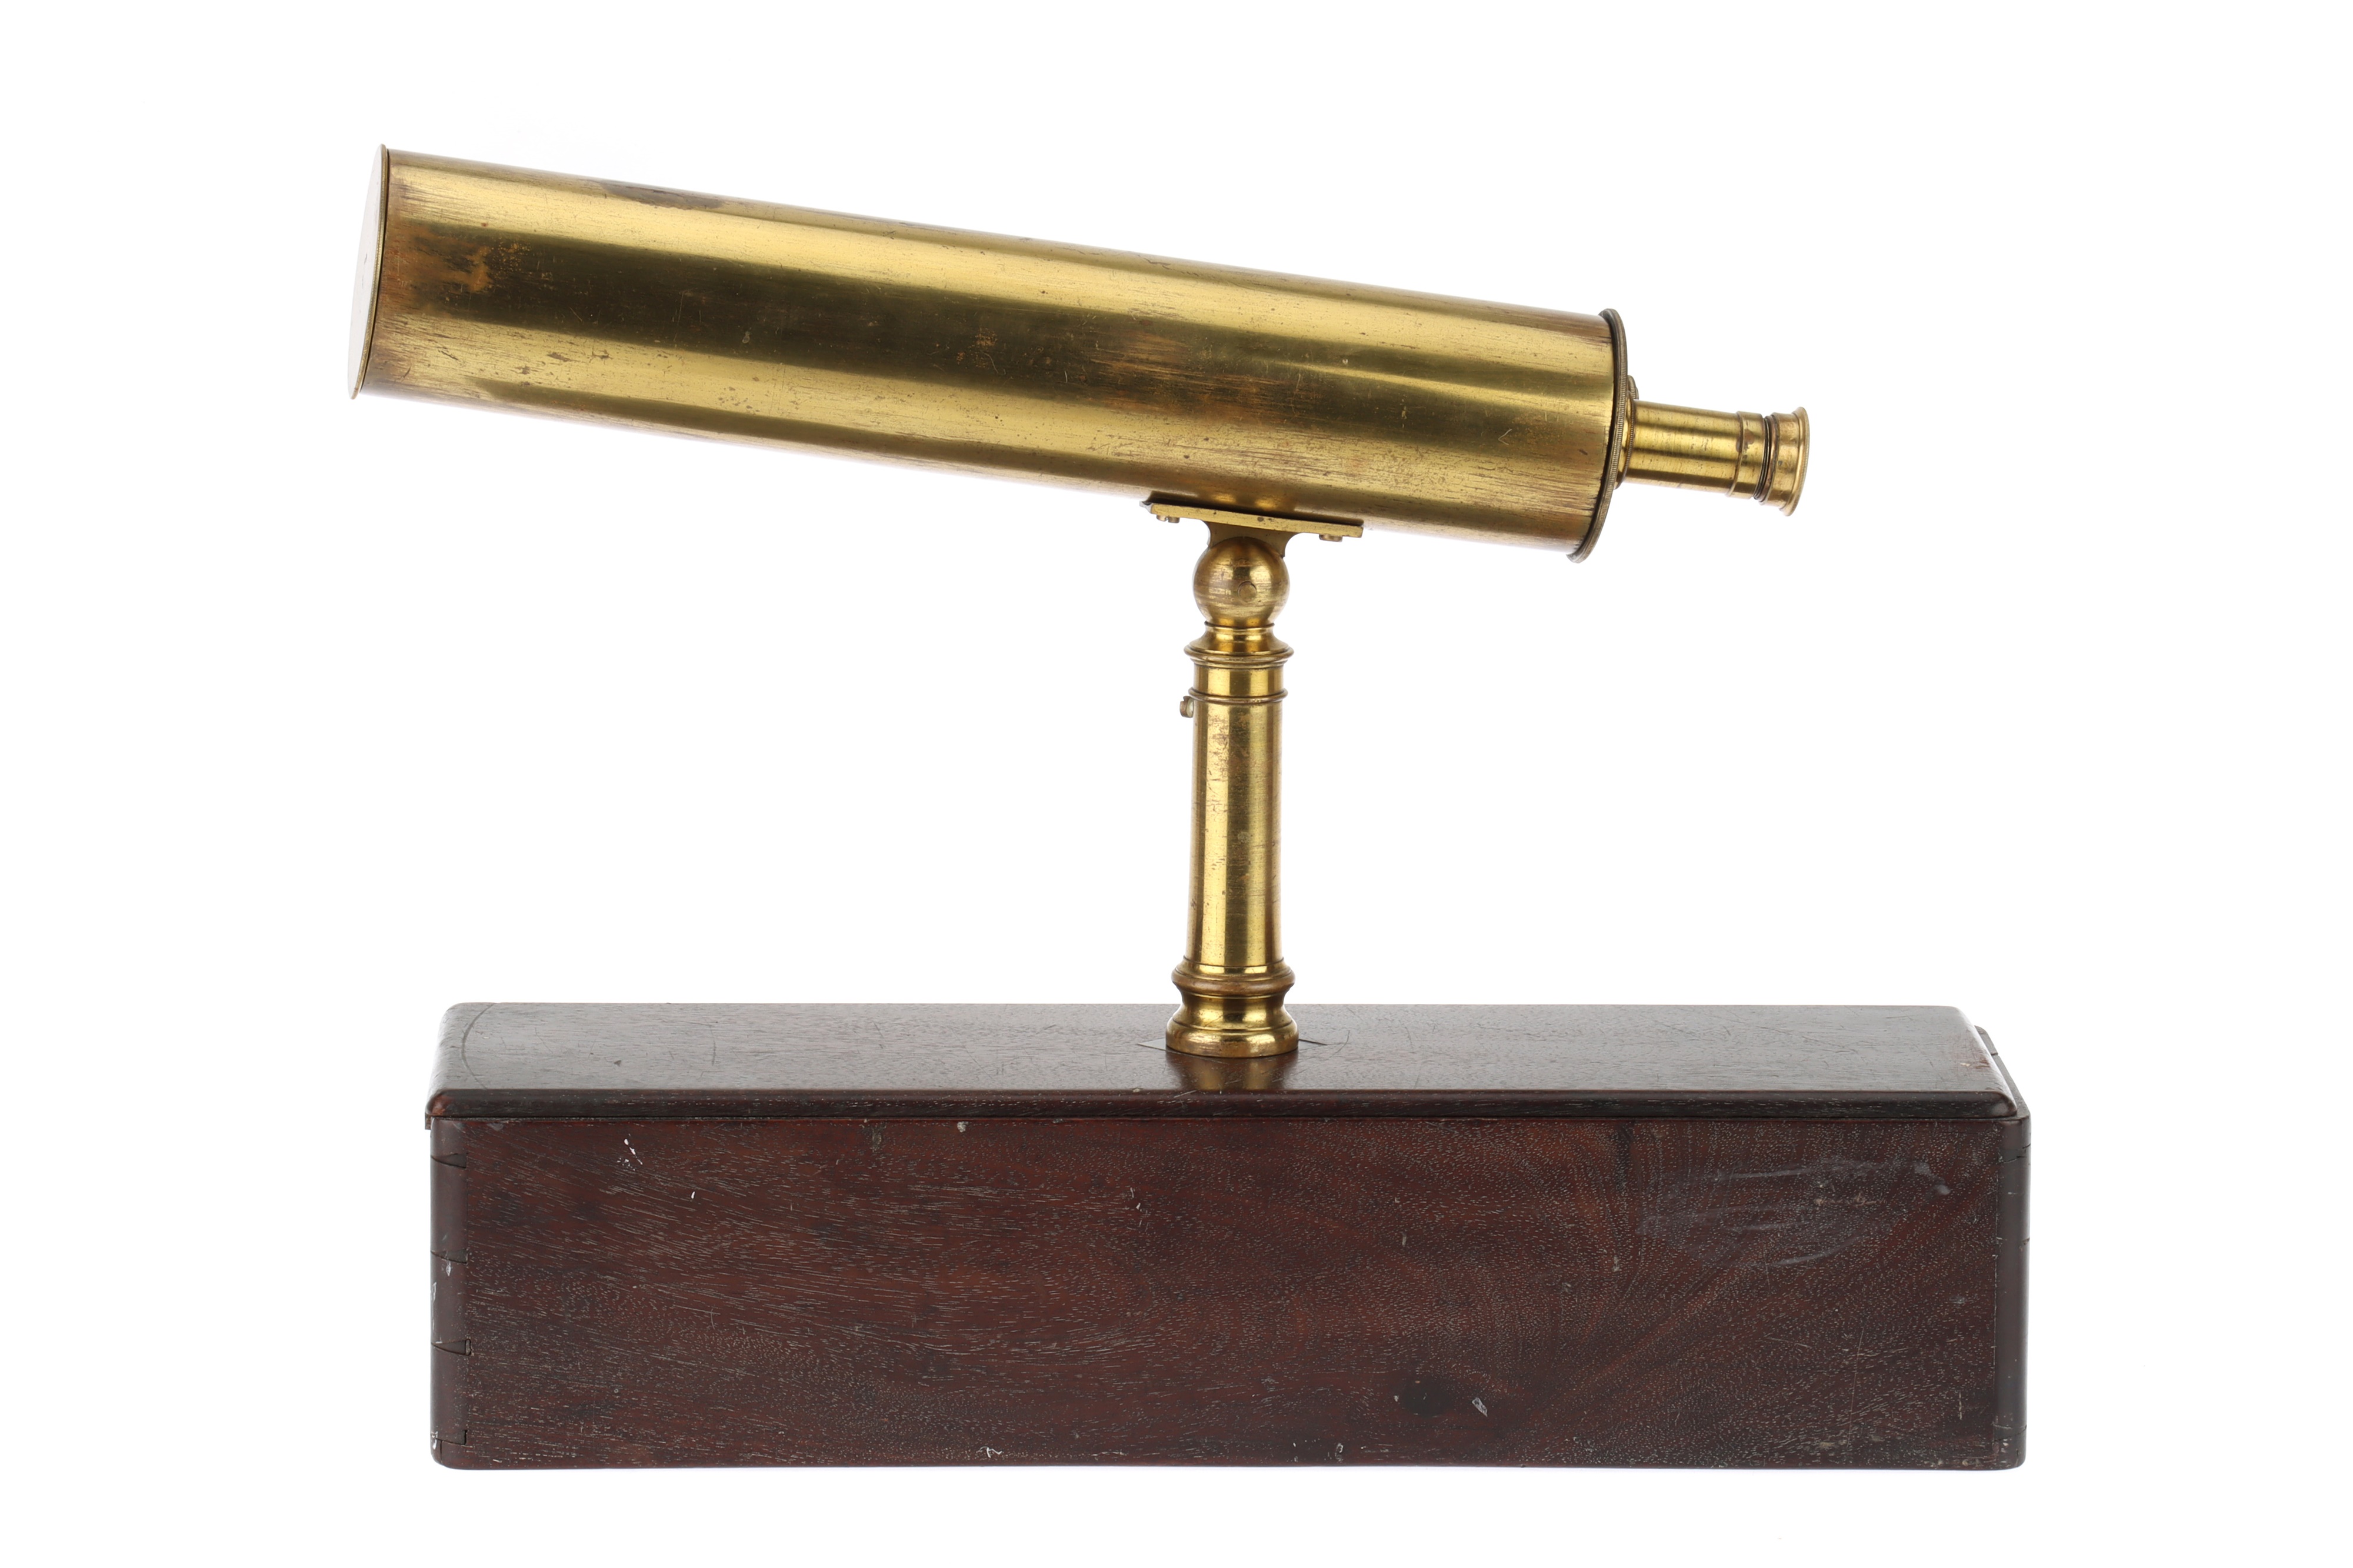 A 2" Portable Reflecting Telescope By James Short, - Image 2 of 4